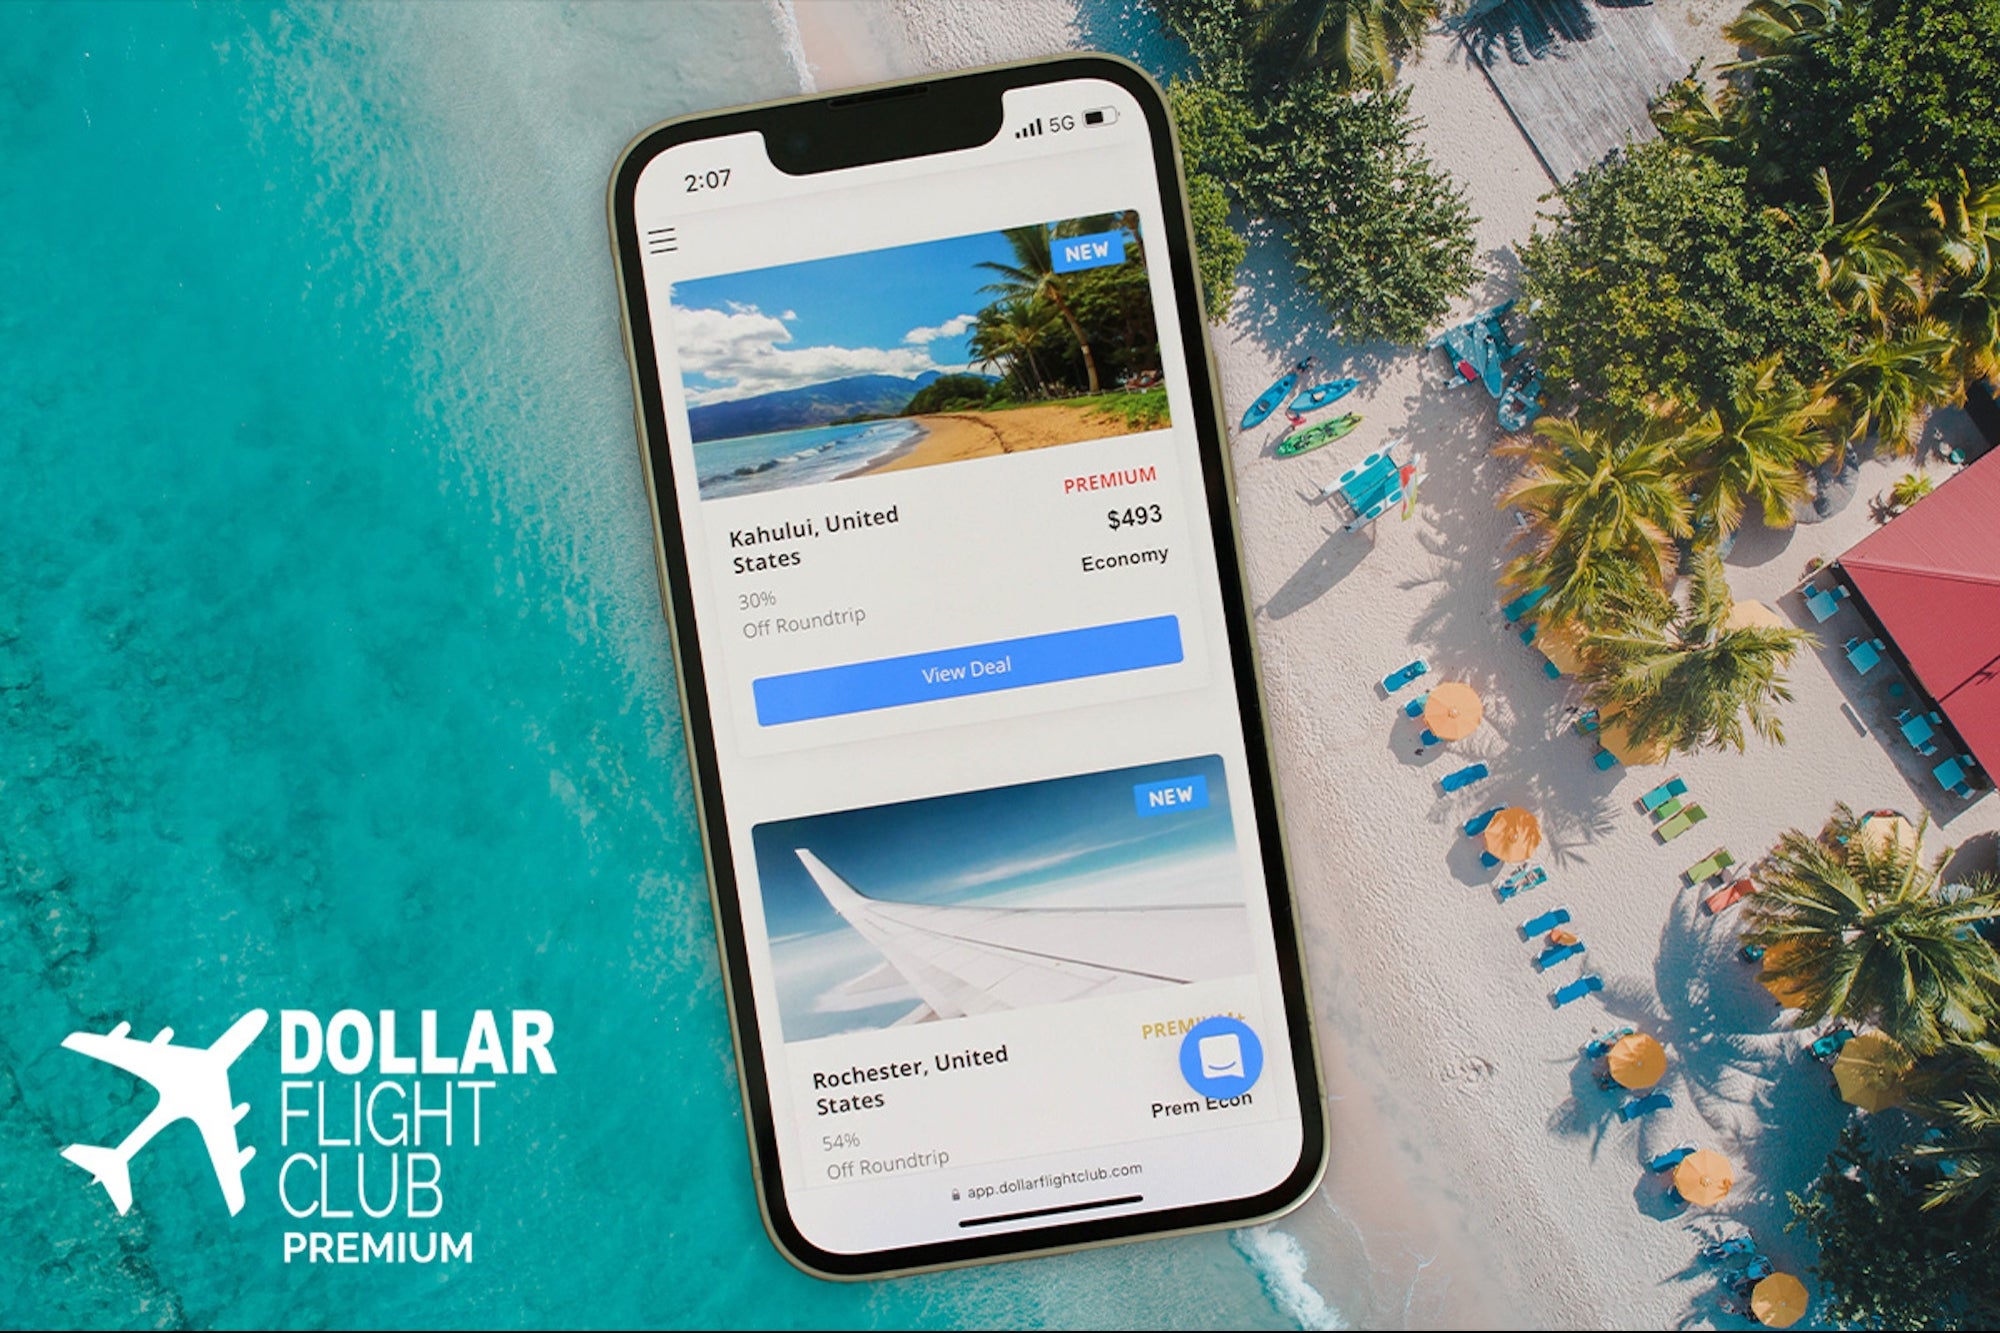 Make Travel More Affordable with a $49.99 Lifetime Subscription to Dollar Flight Club